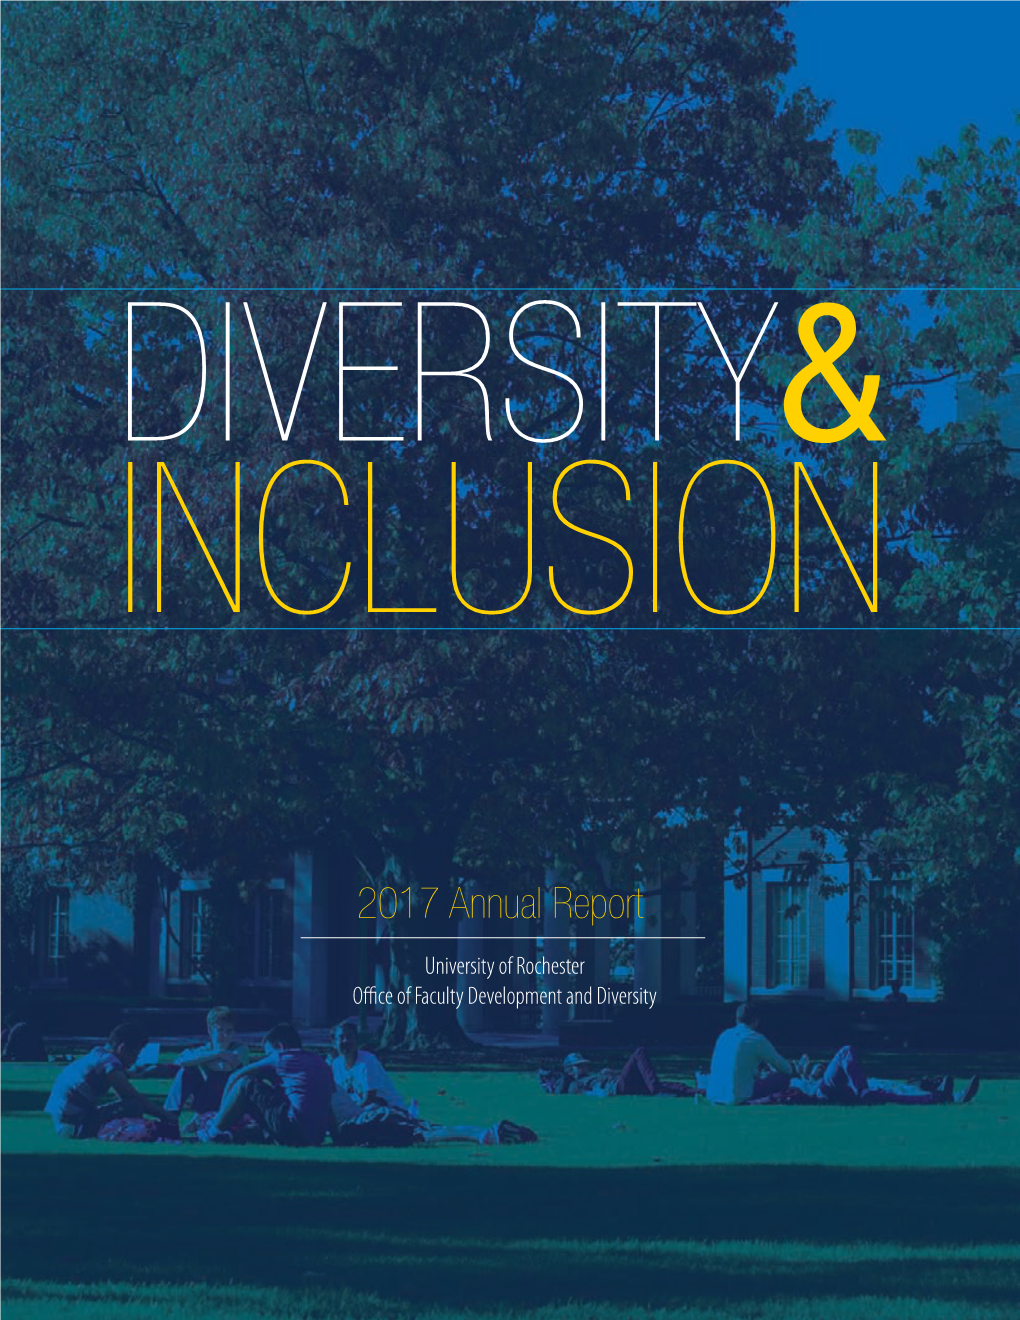 2017 Annual Report on Diversity and Inclusion